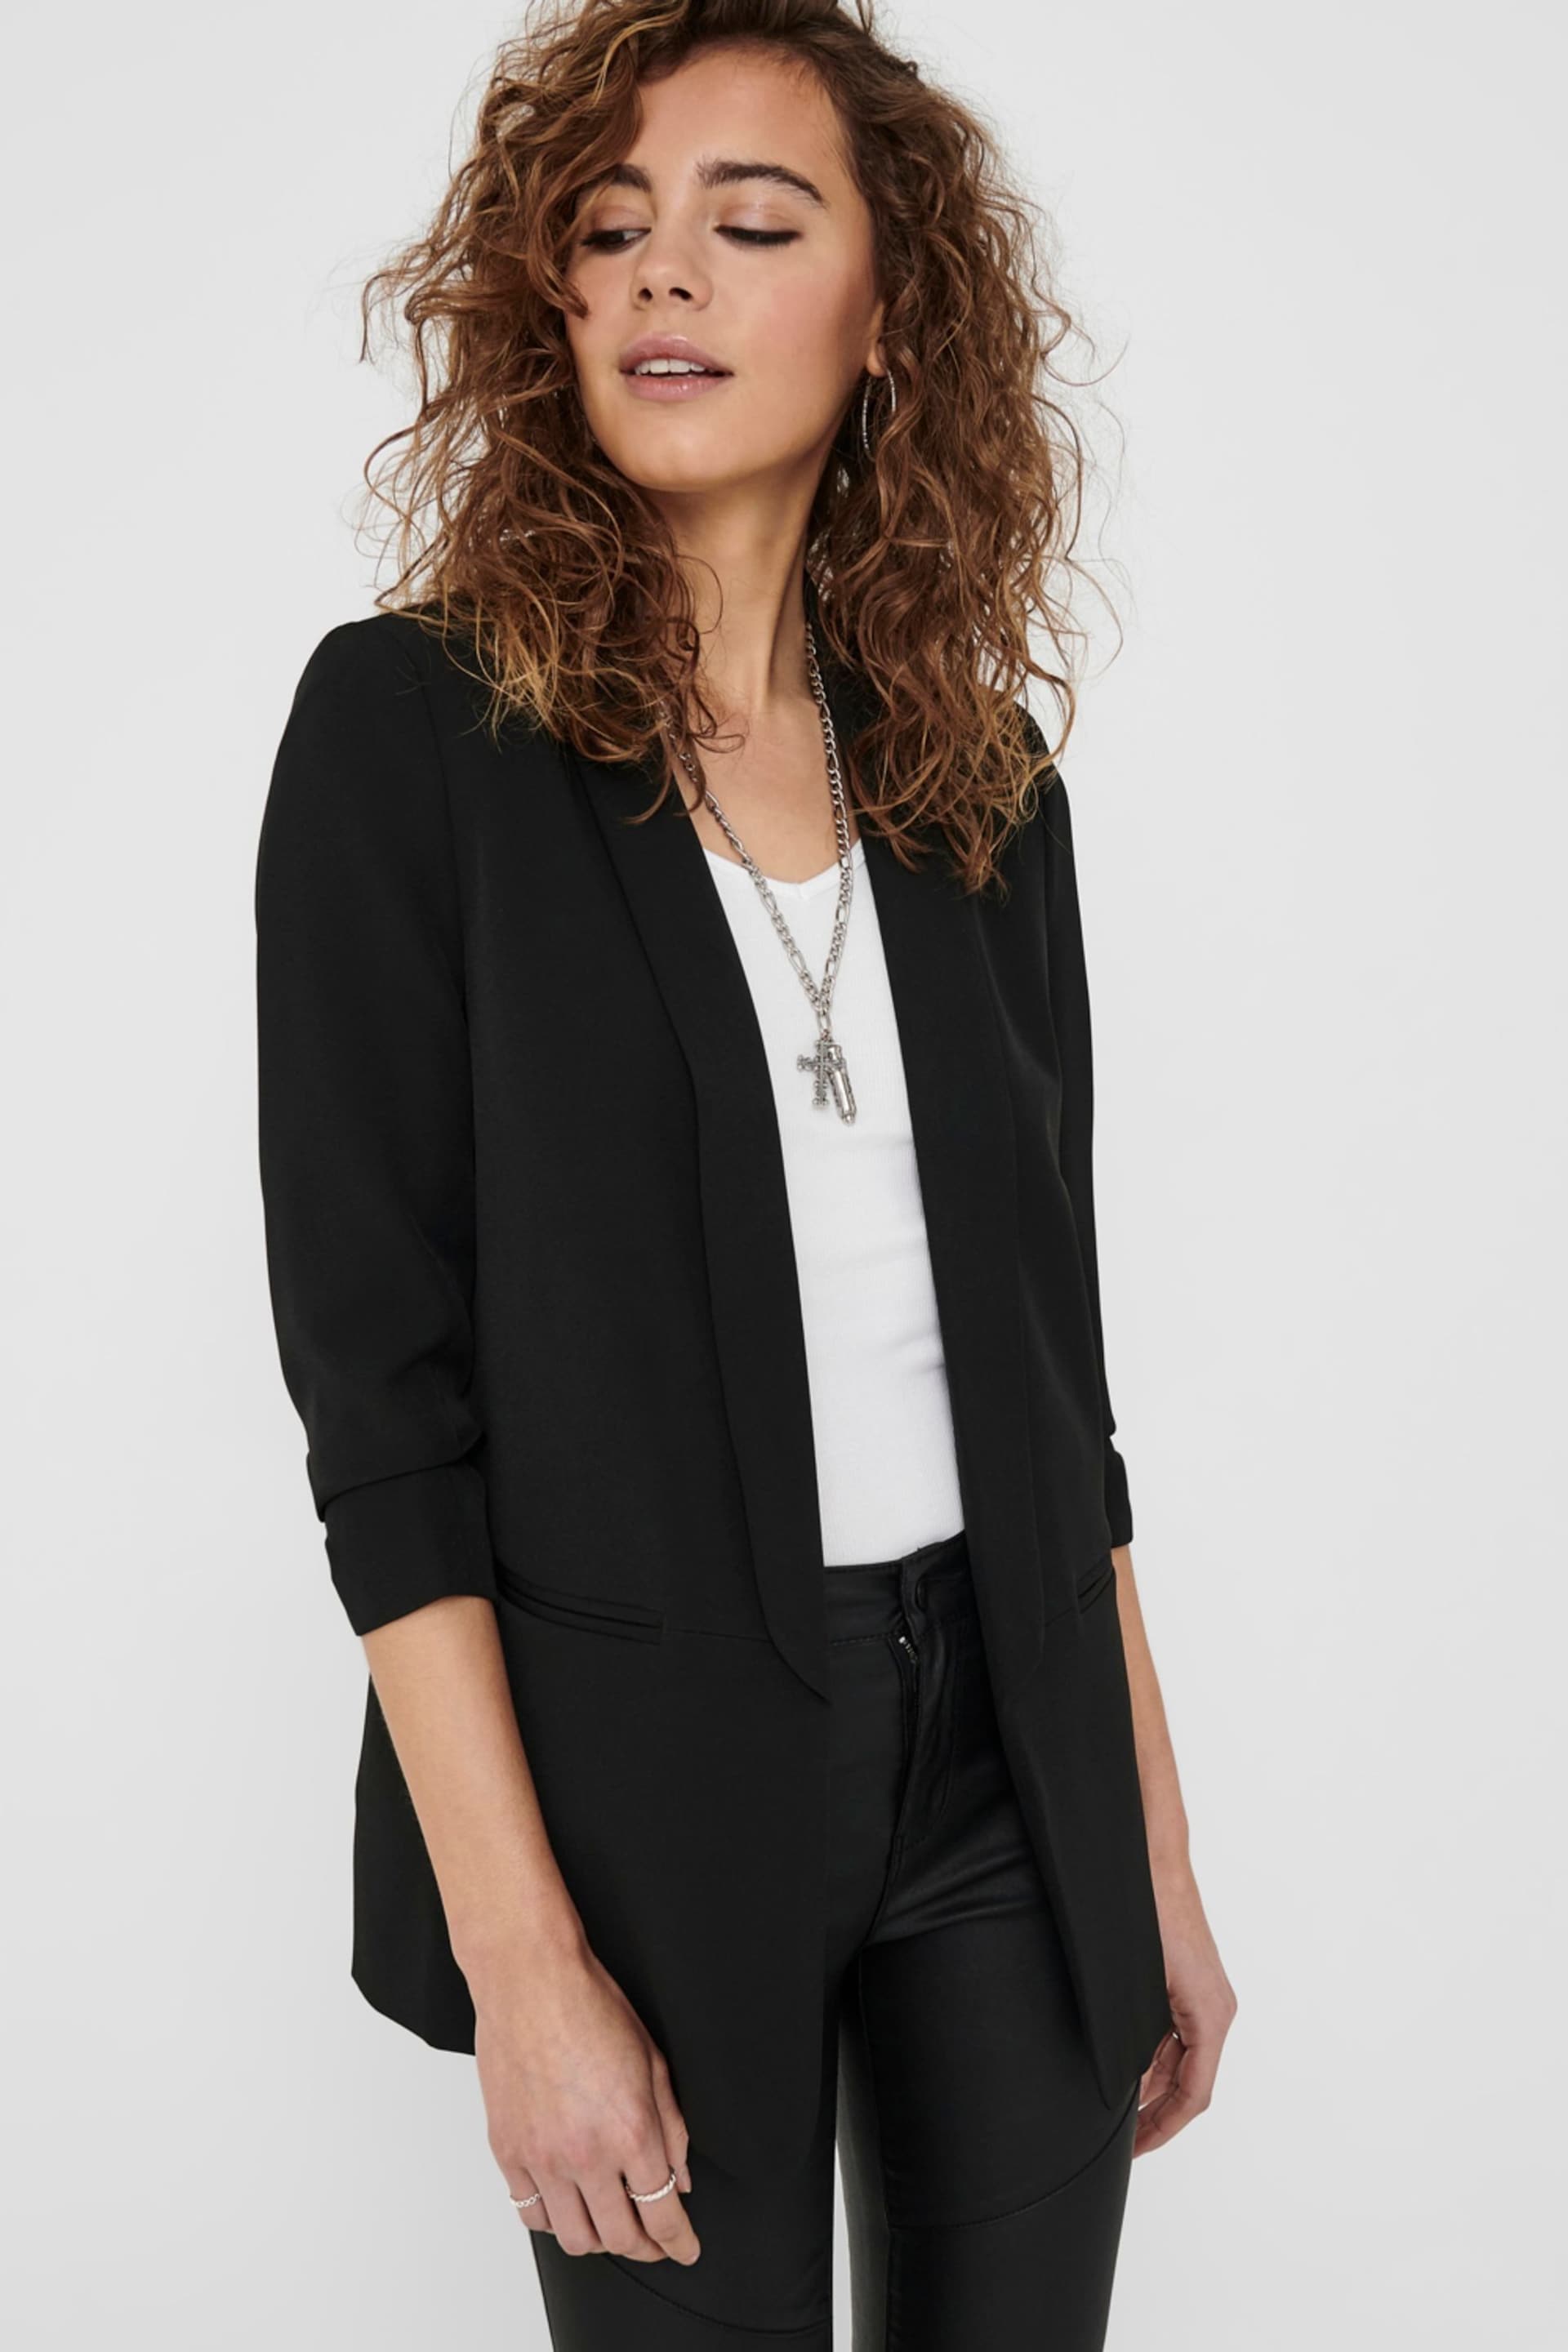 ONLY Black Ruched Sleeve Workwear Blazer - Image 2 of 5